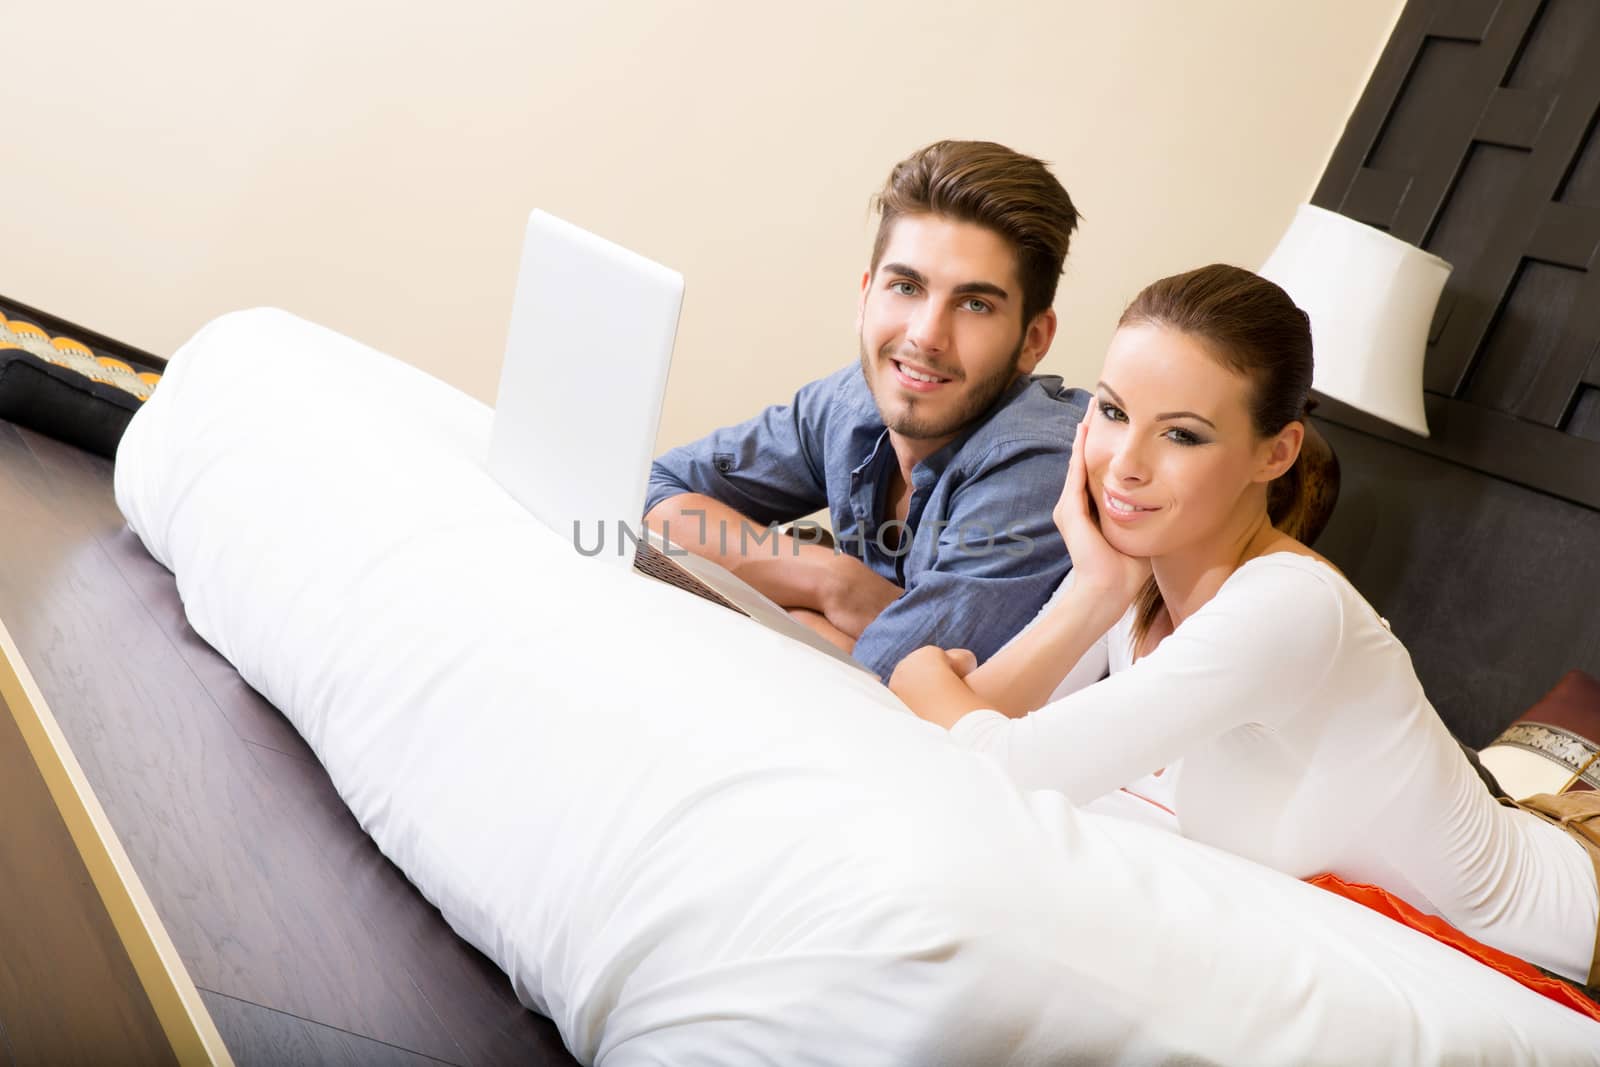 Young couple using a notebook in a asian hotel room while lying on the bed.
